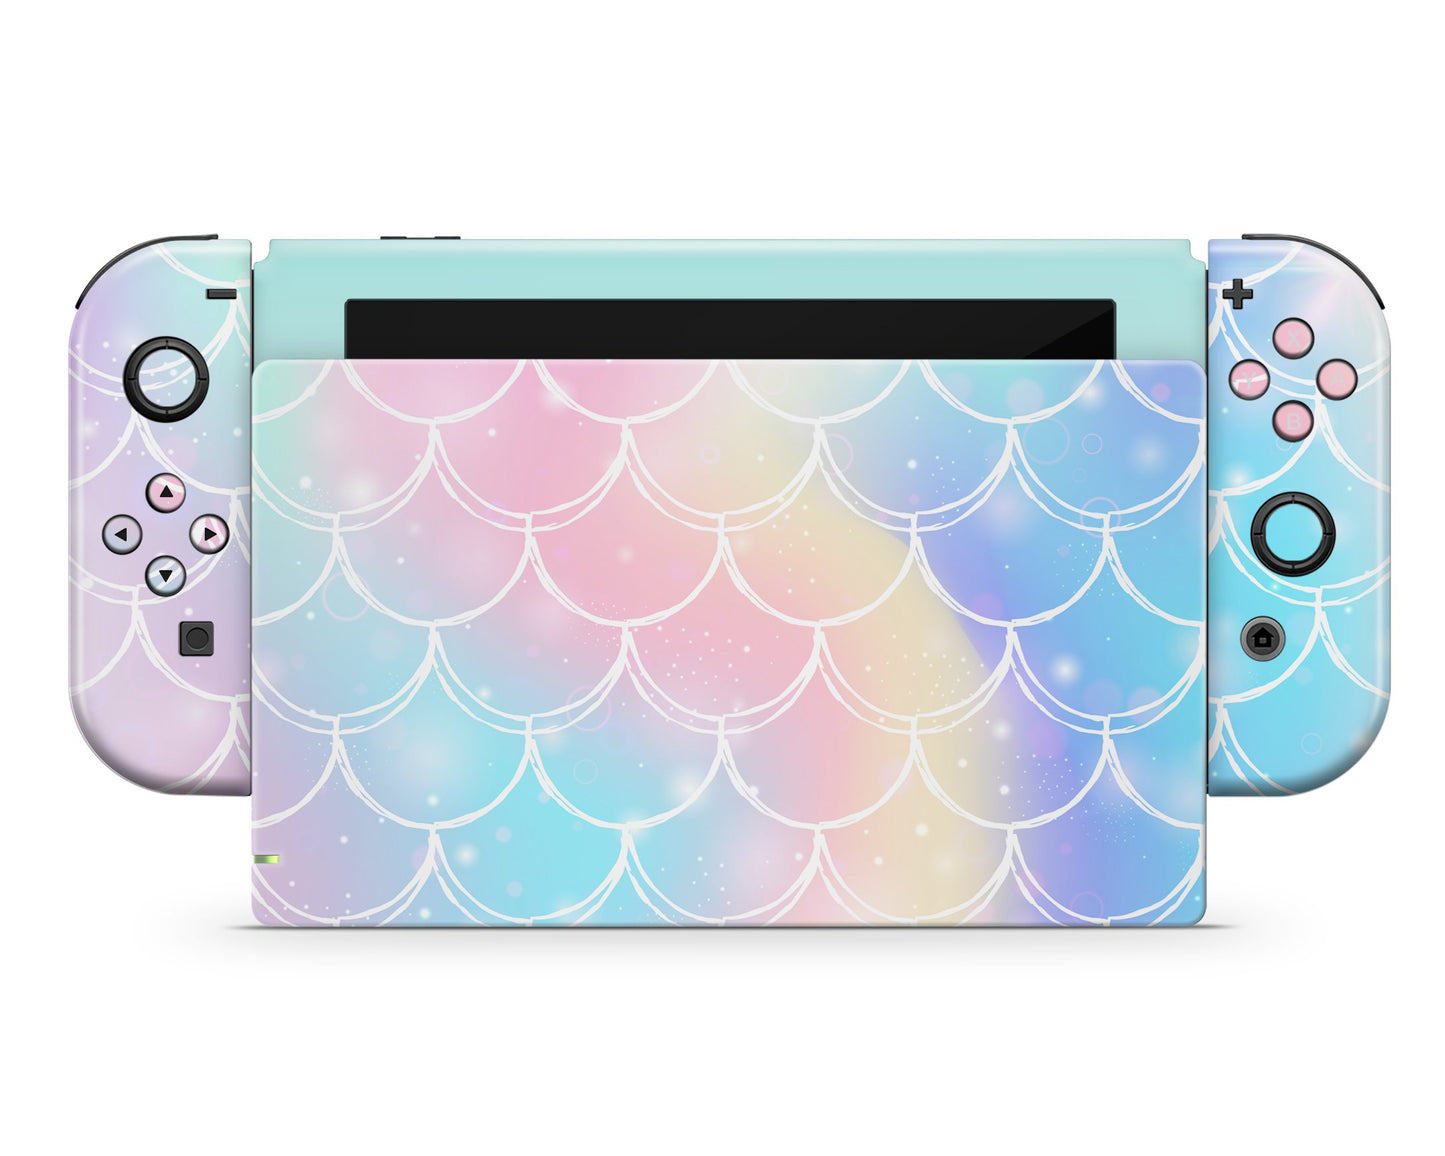 Lux Skins Nintendo Switch Iridescent Pastel Mermaid Classic no logo Skins - Pattern Abstract Skin